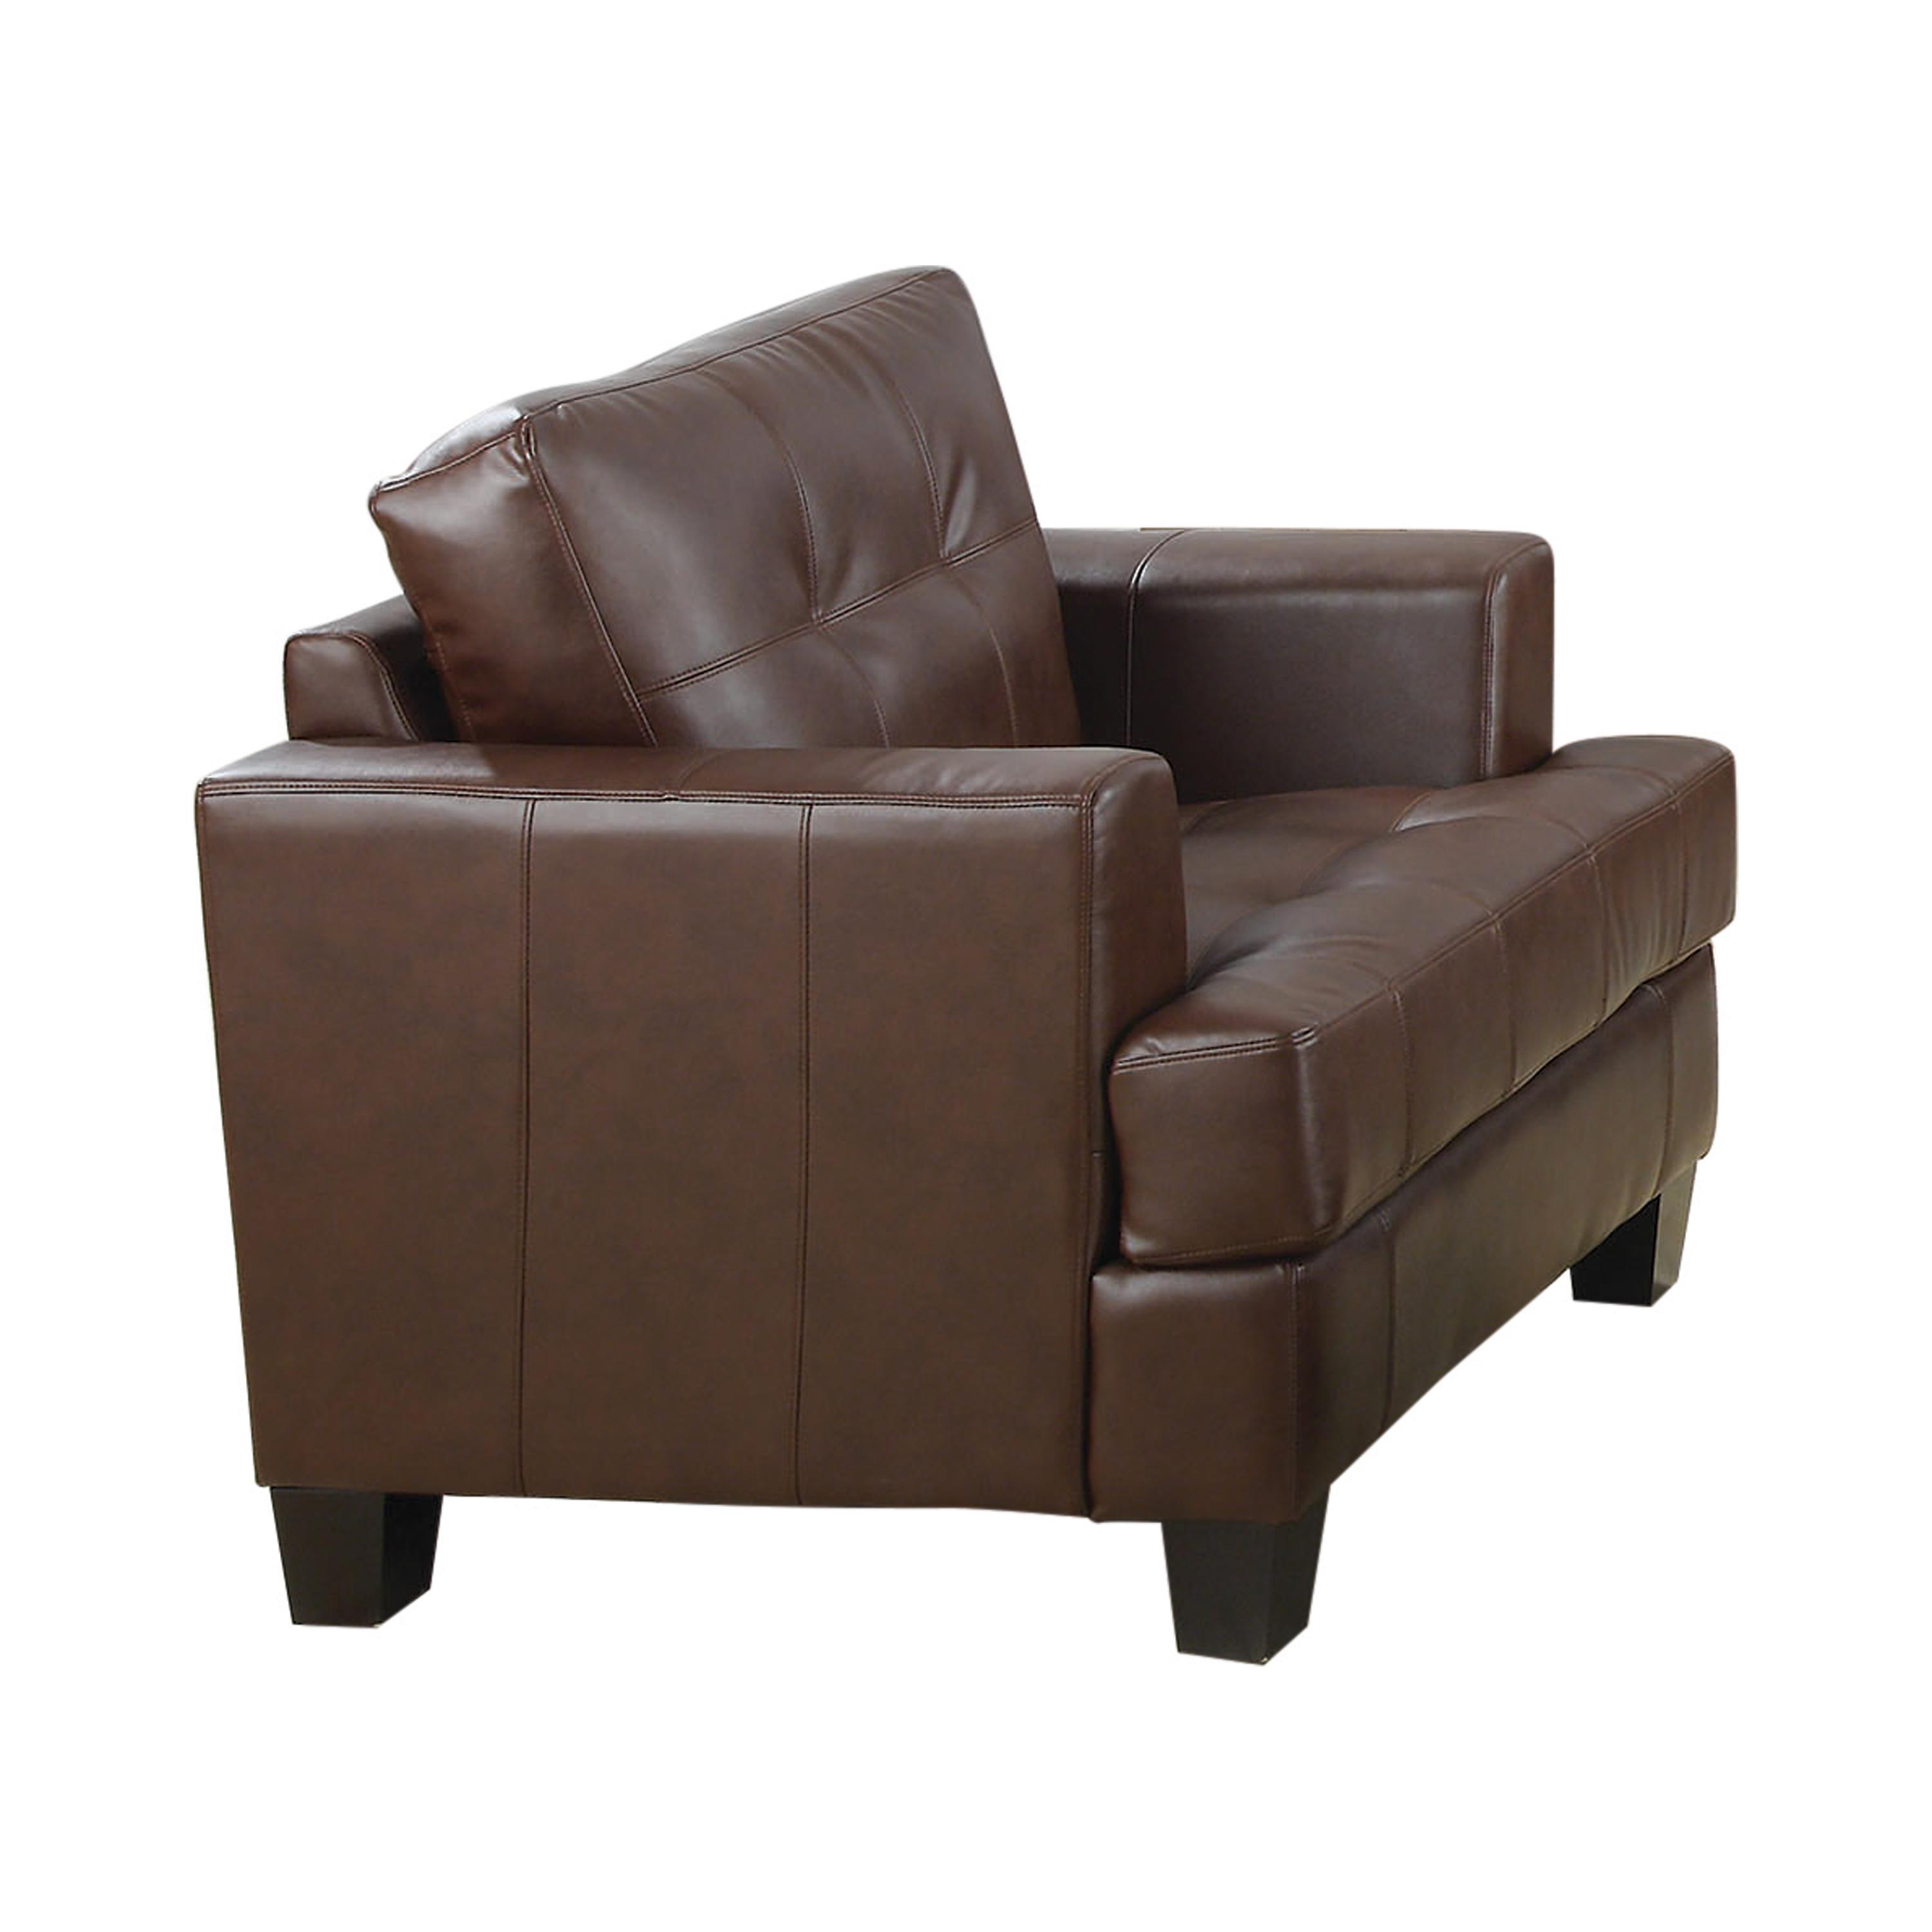 Transitional Arm Chair 504073 Samuel 504073 in Dark Brown Leatherette